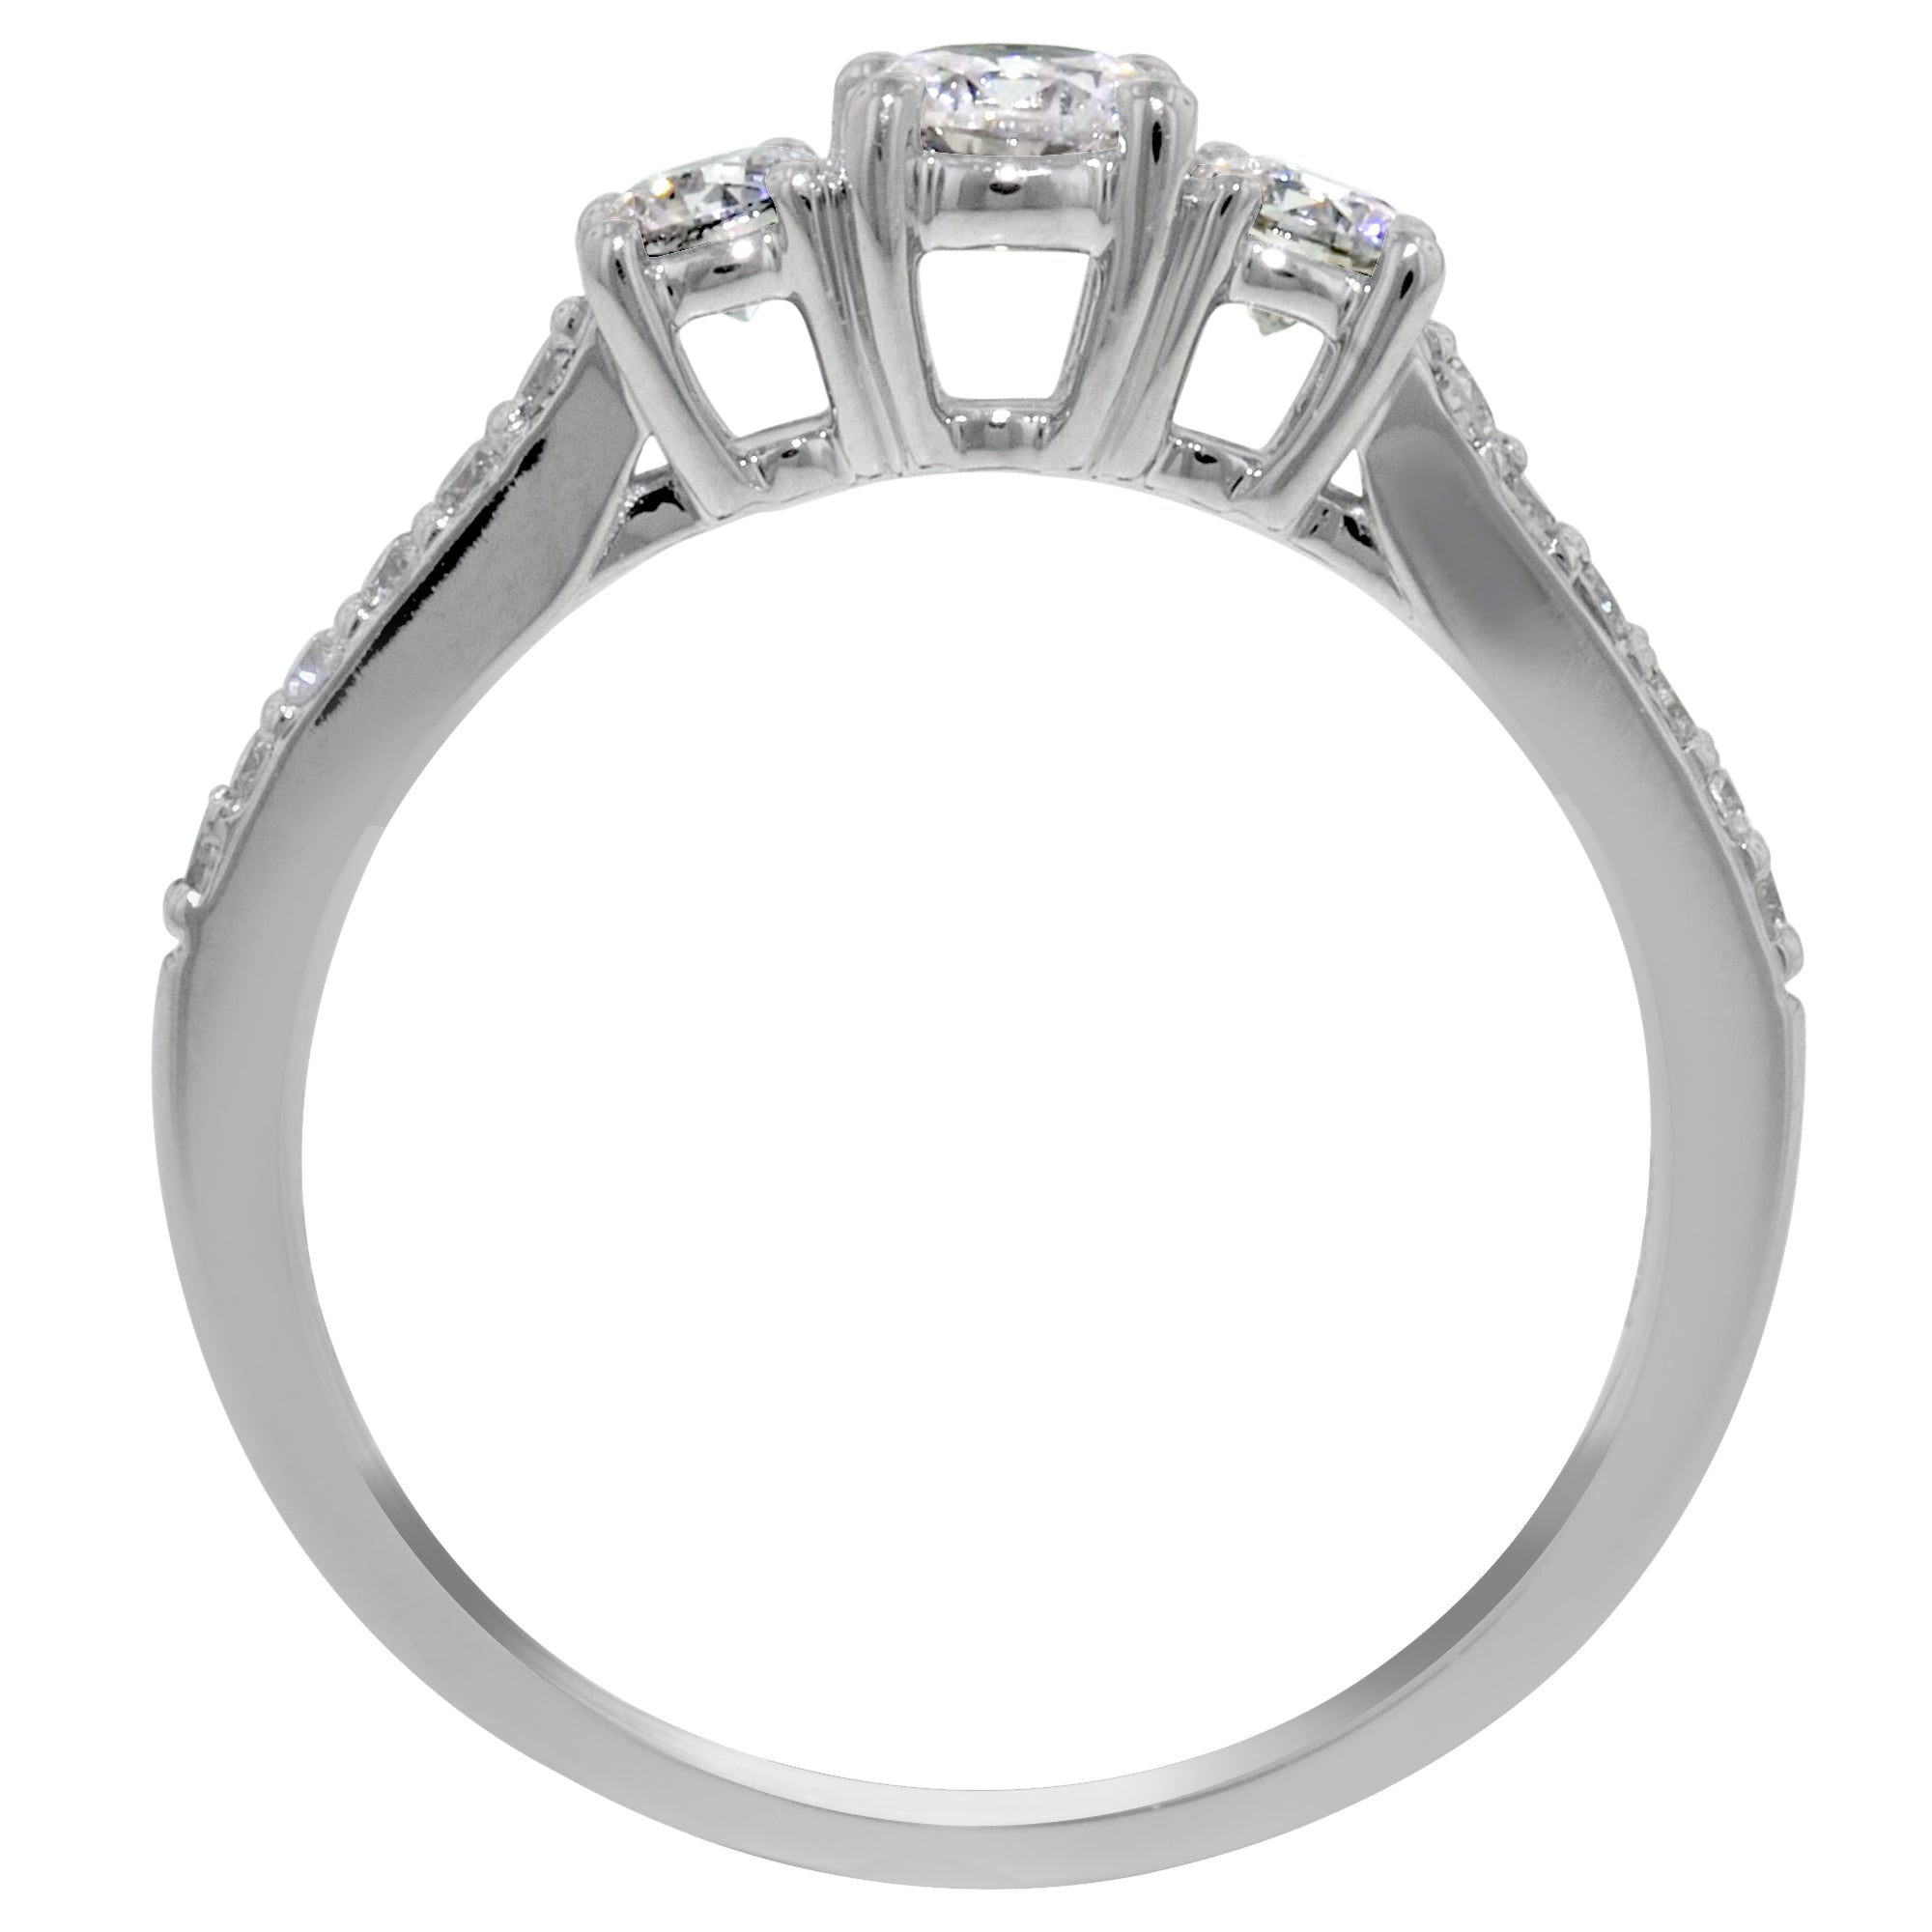 Northern Star Diamond Three Stone Engagement Ring in 14kt White Gold (3/4ct tw)